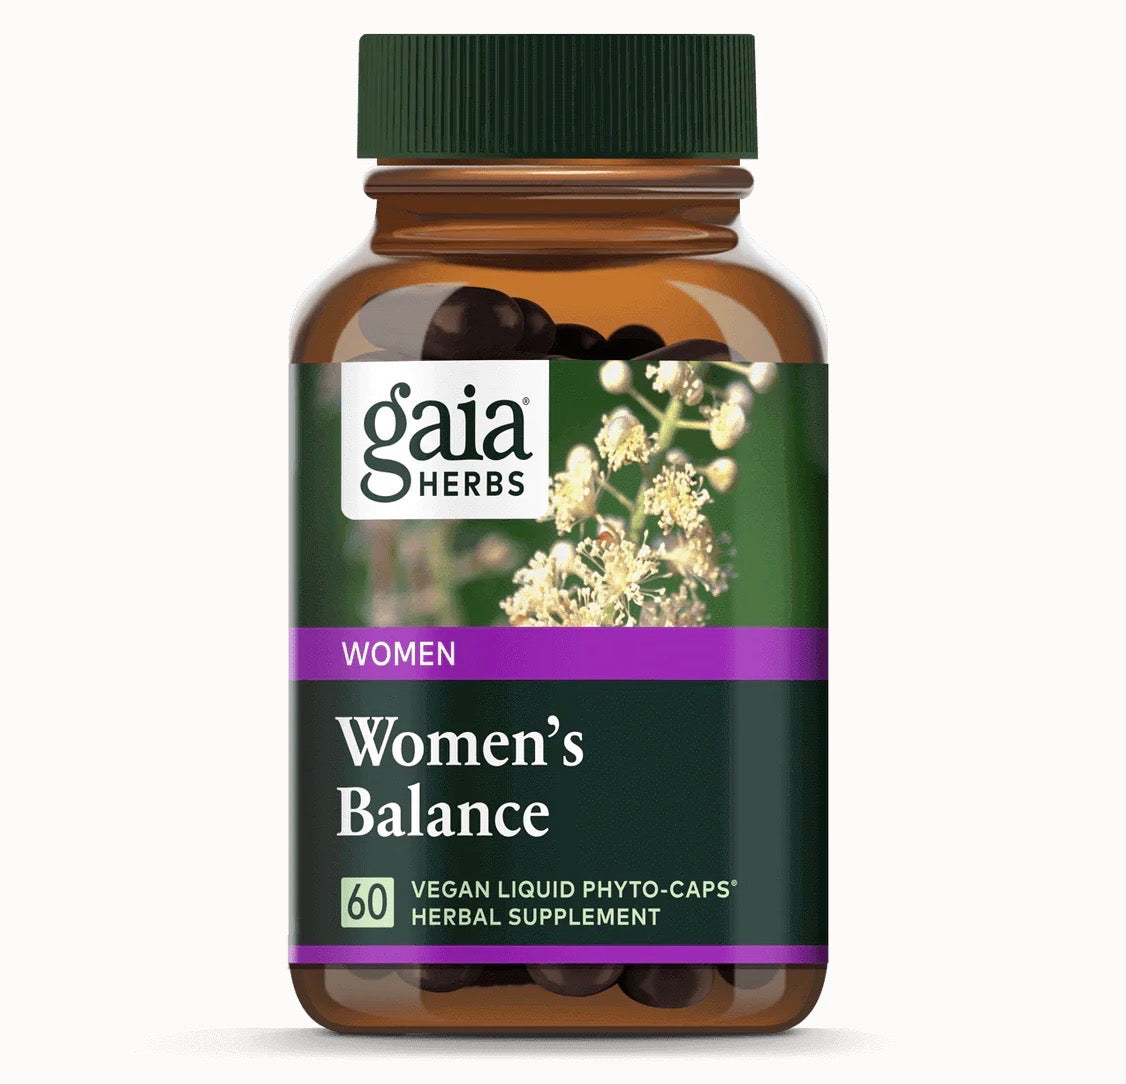 Photo and link to Gaia Women's Balance